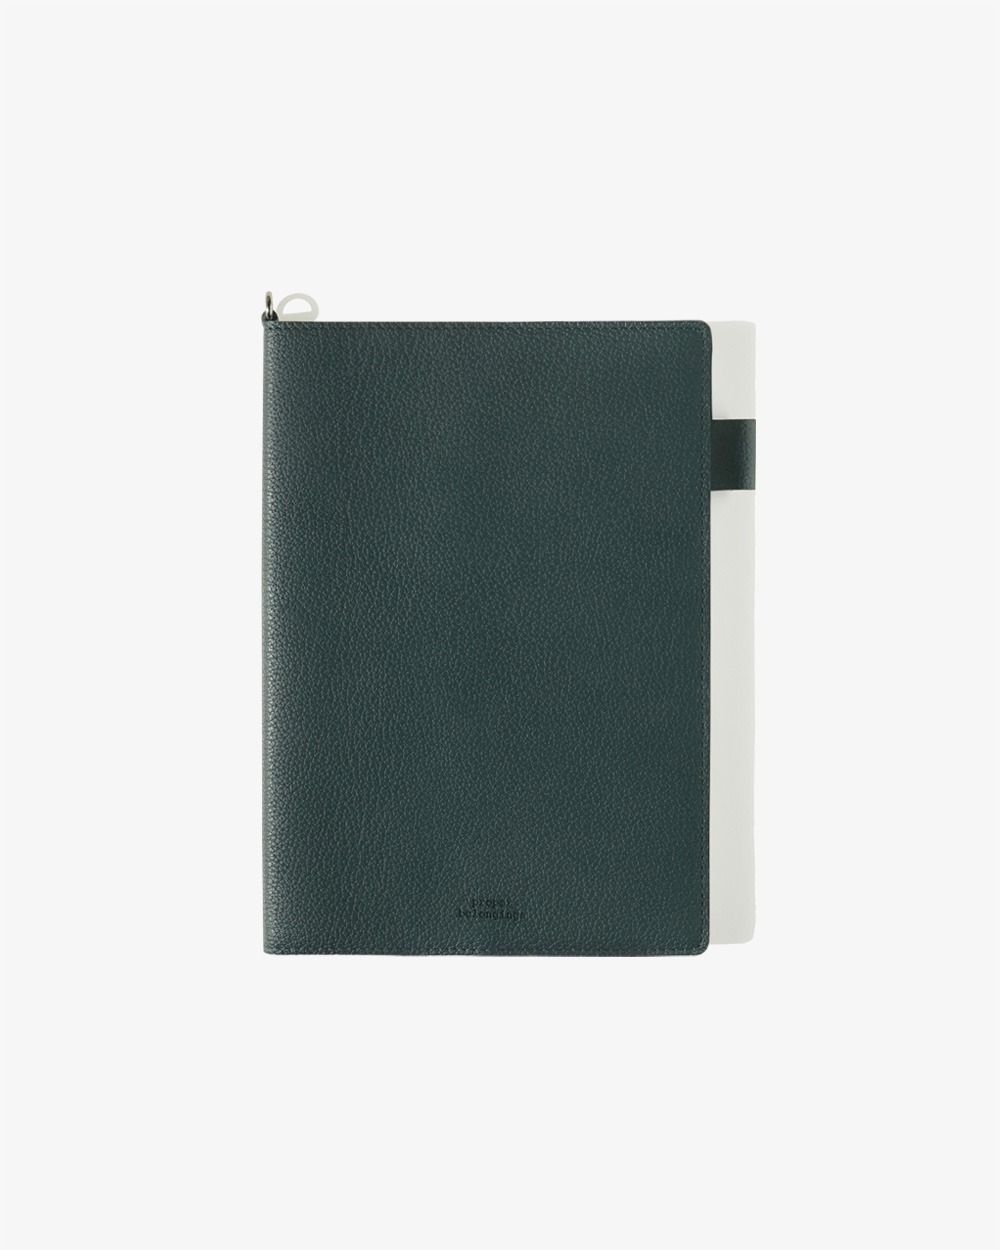 Proper Leather Cover (B6)